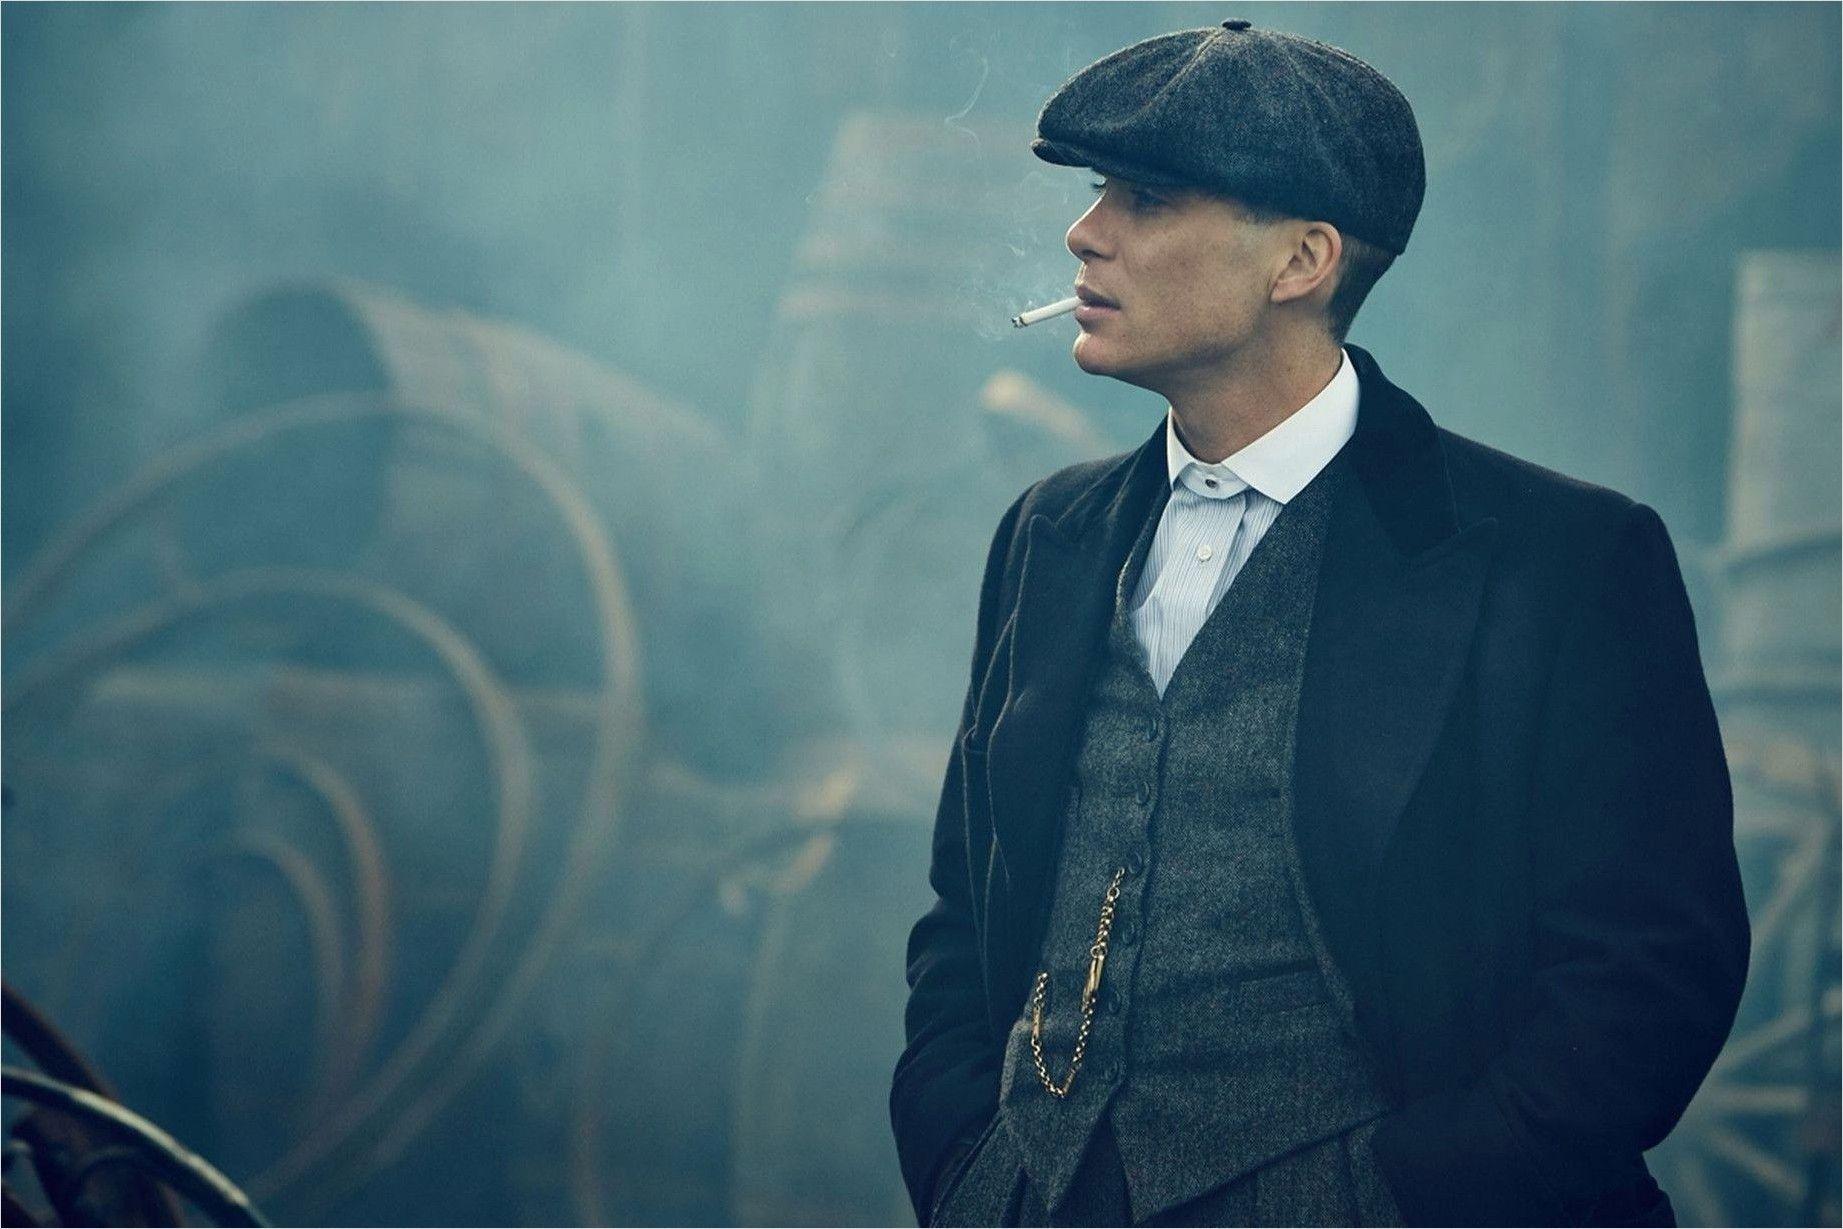 Wallpaper ID 295547  TV Show Peaky Blinders Phone Wallpaper Cillian  Murphy Thomas Shelby 2160x3840 free download